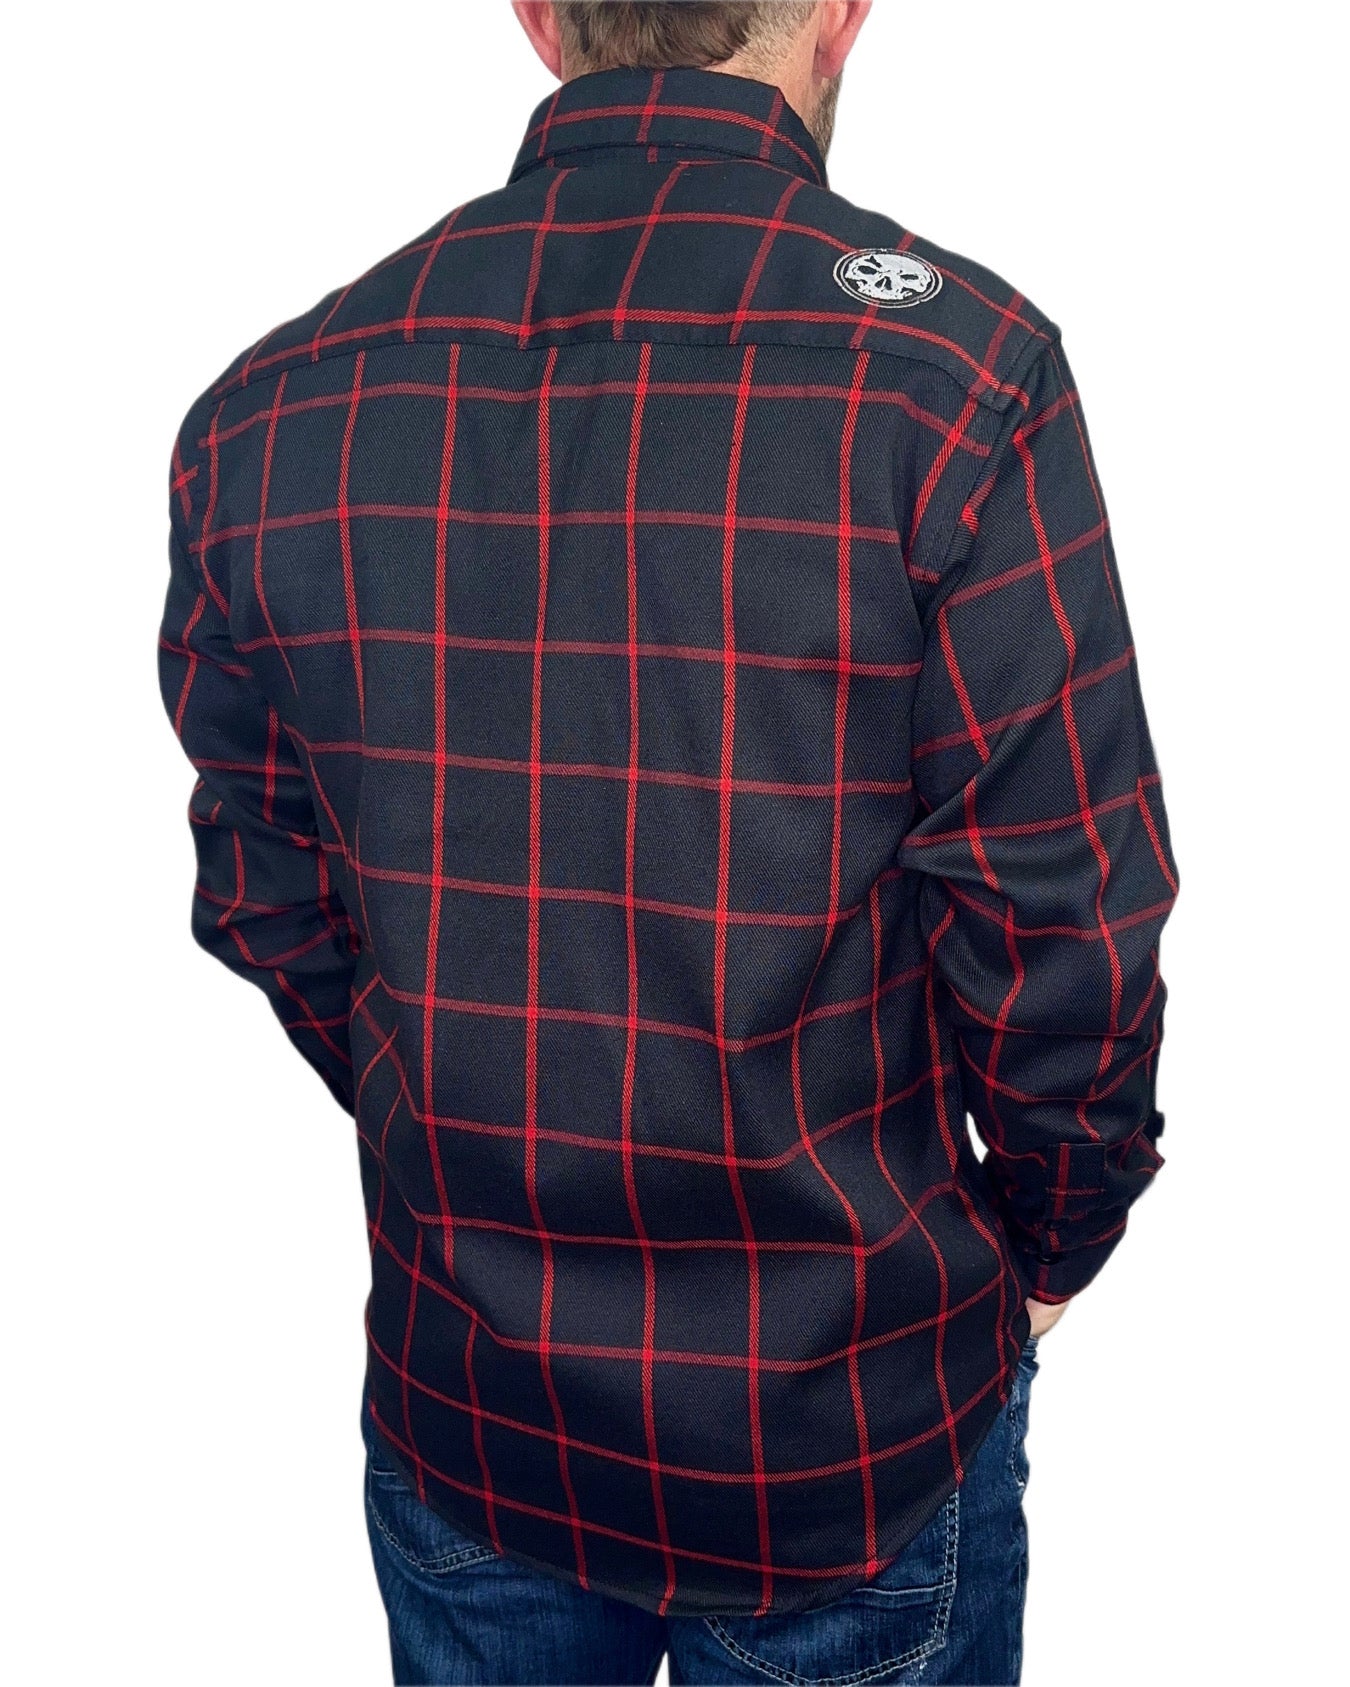 NEW! Black & Red Embroidered Flannel (Hidden Snap Collars)